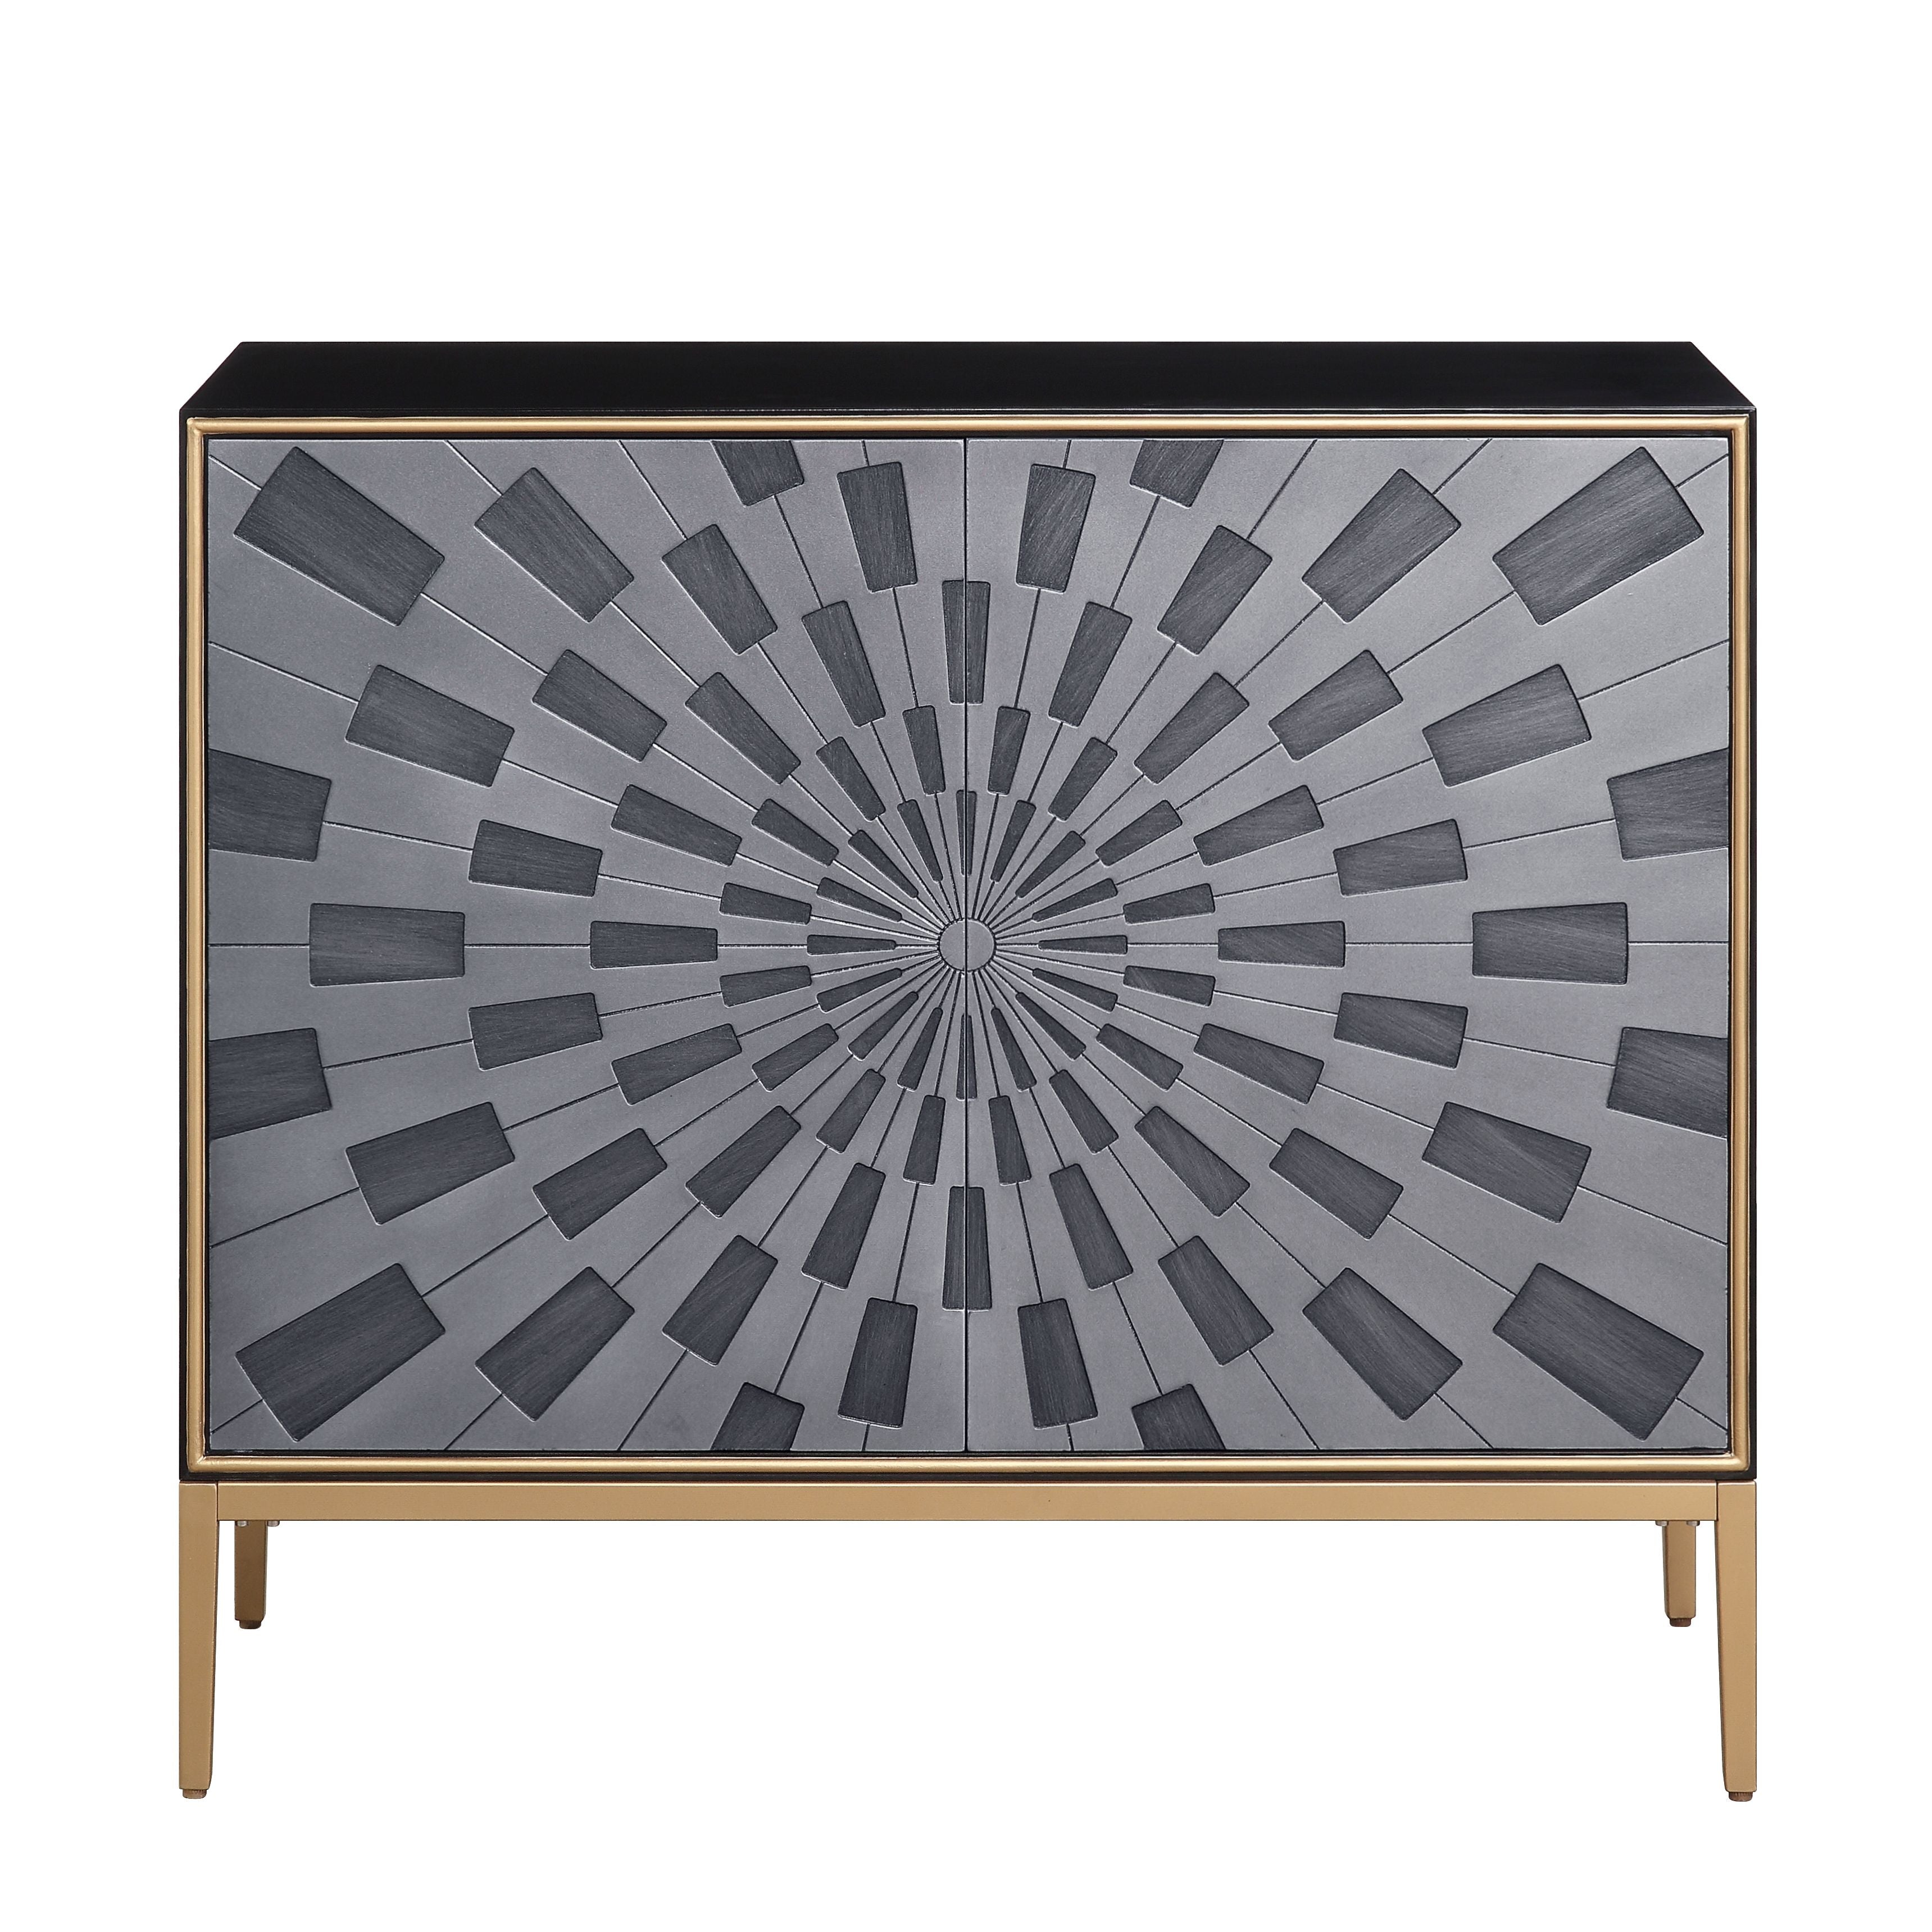 ACME Furniture Coffee Tables - ACME Quilla Console Table, Black, Gray & Brass Finish